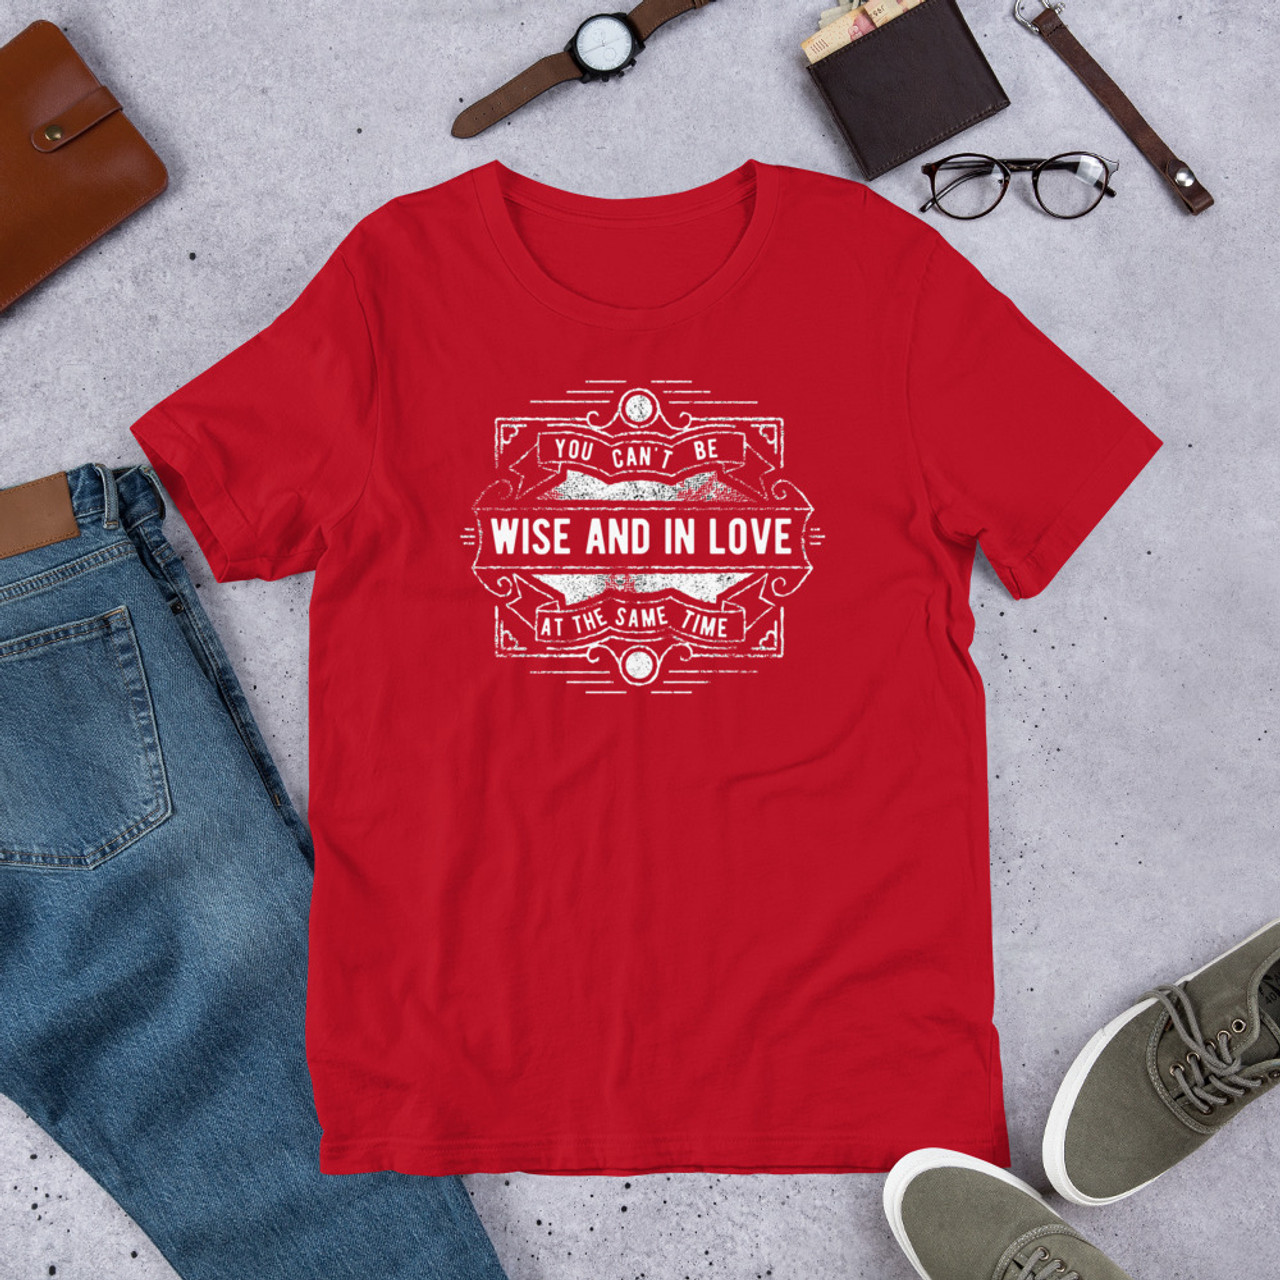 Red T-Shirt - Bella + Canvas 3001 Wise And In Love